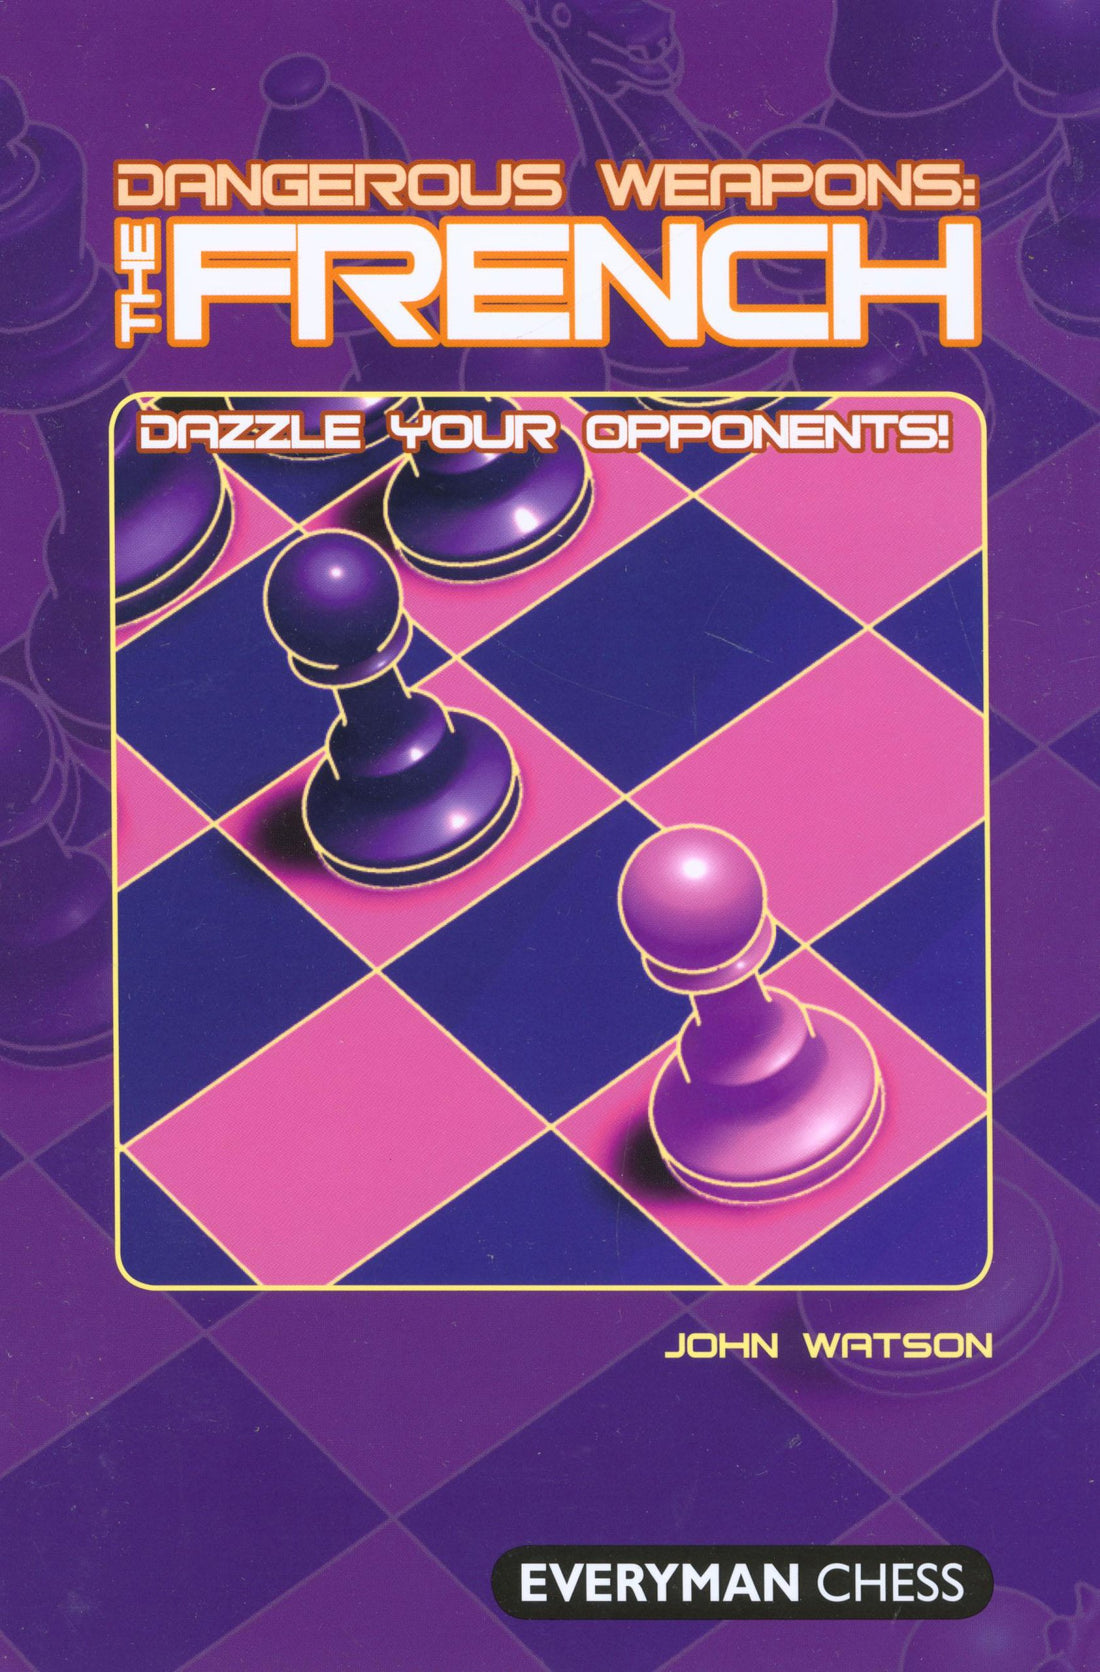 Dangerous Weapons: The Sicilian Defense - Chess Opening E-book